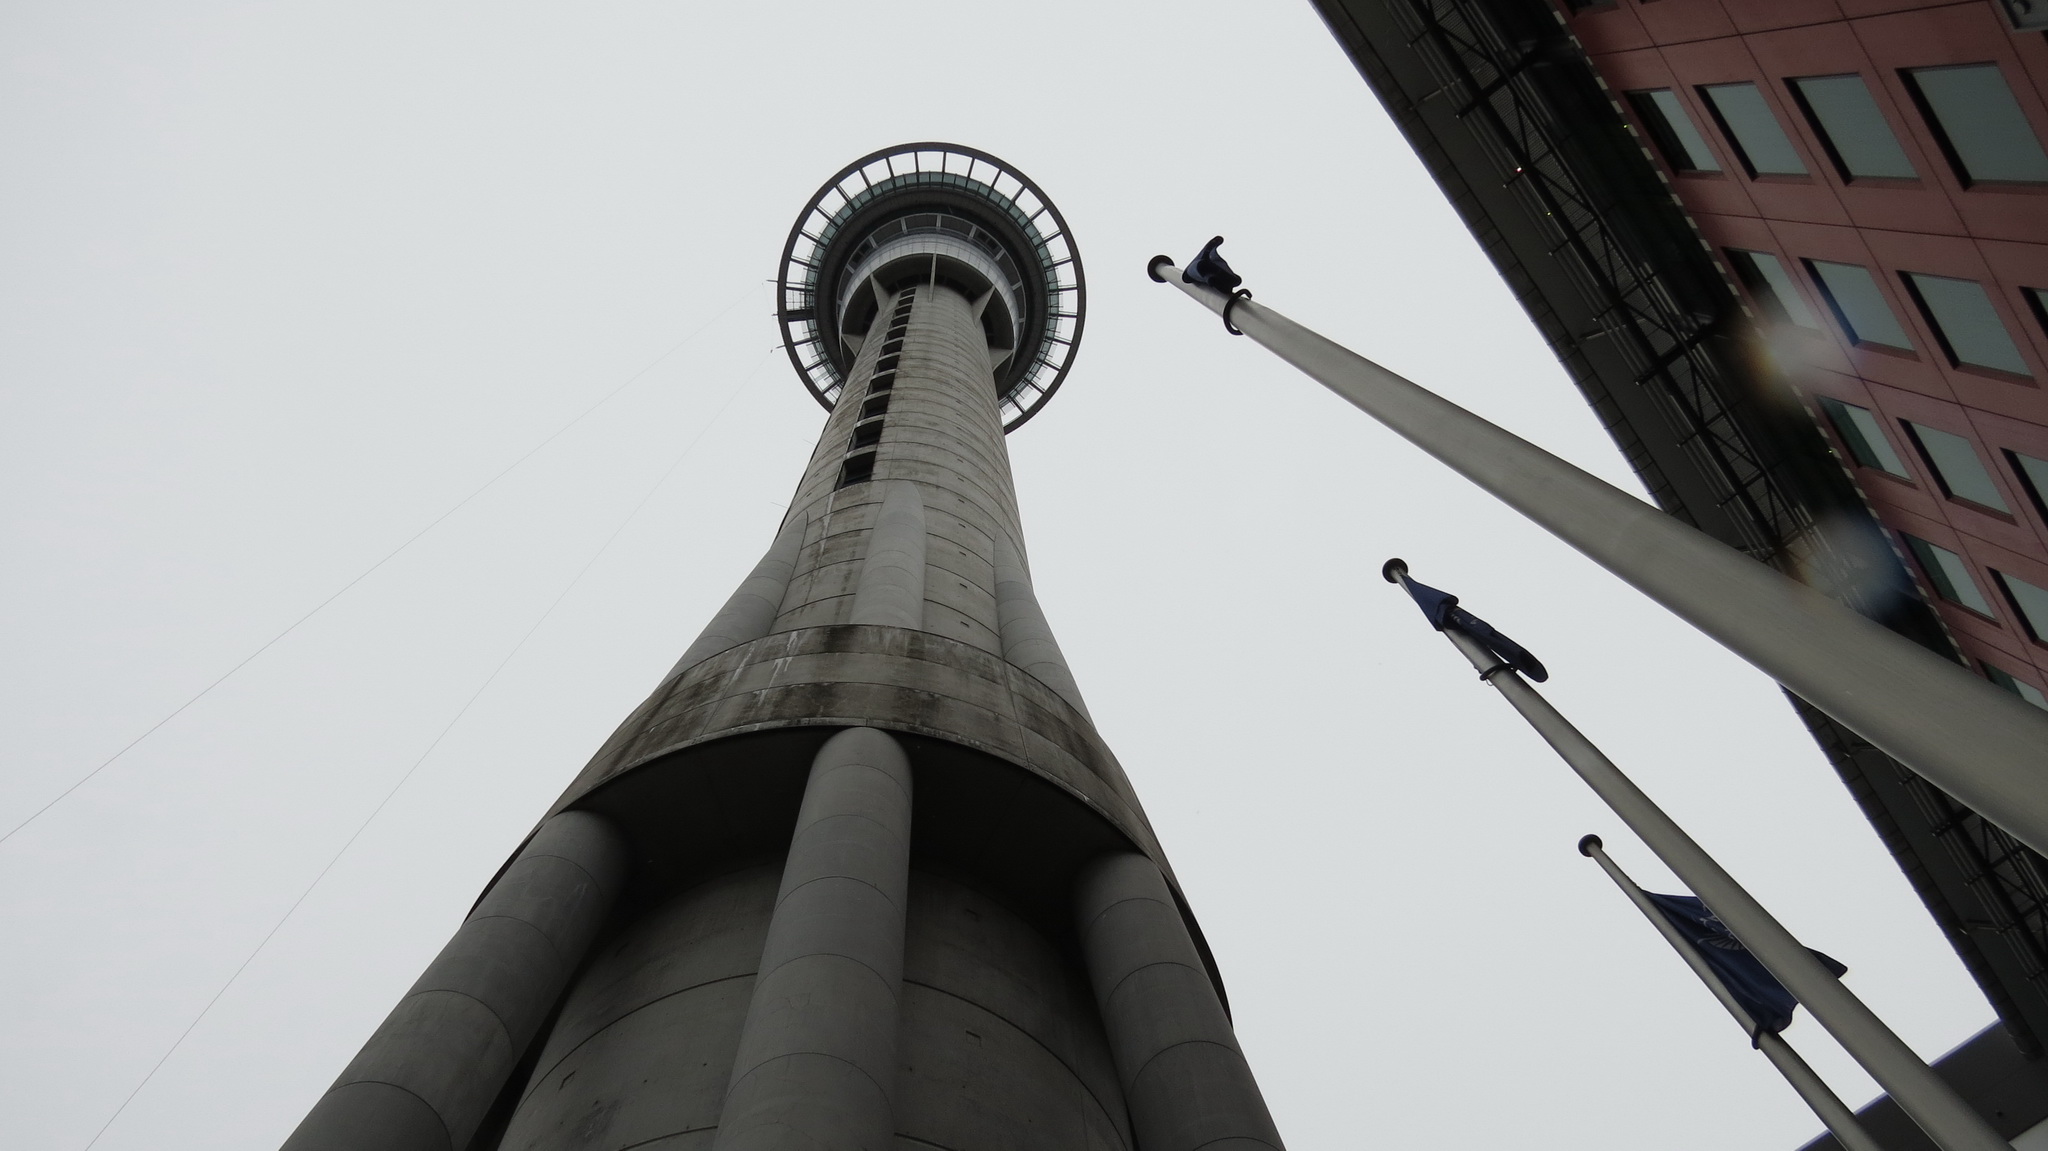 Sky Tower (Auckland) - Wikipedia